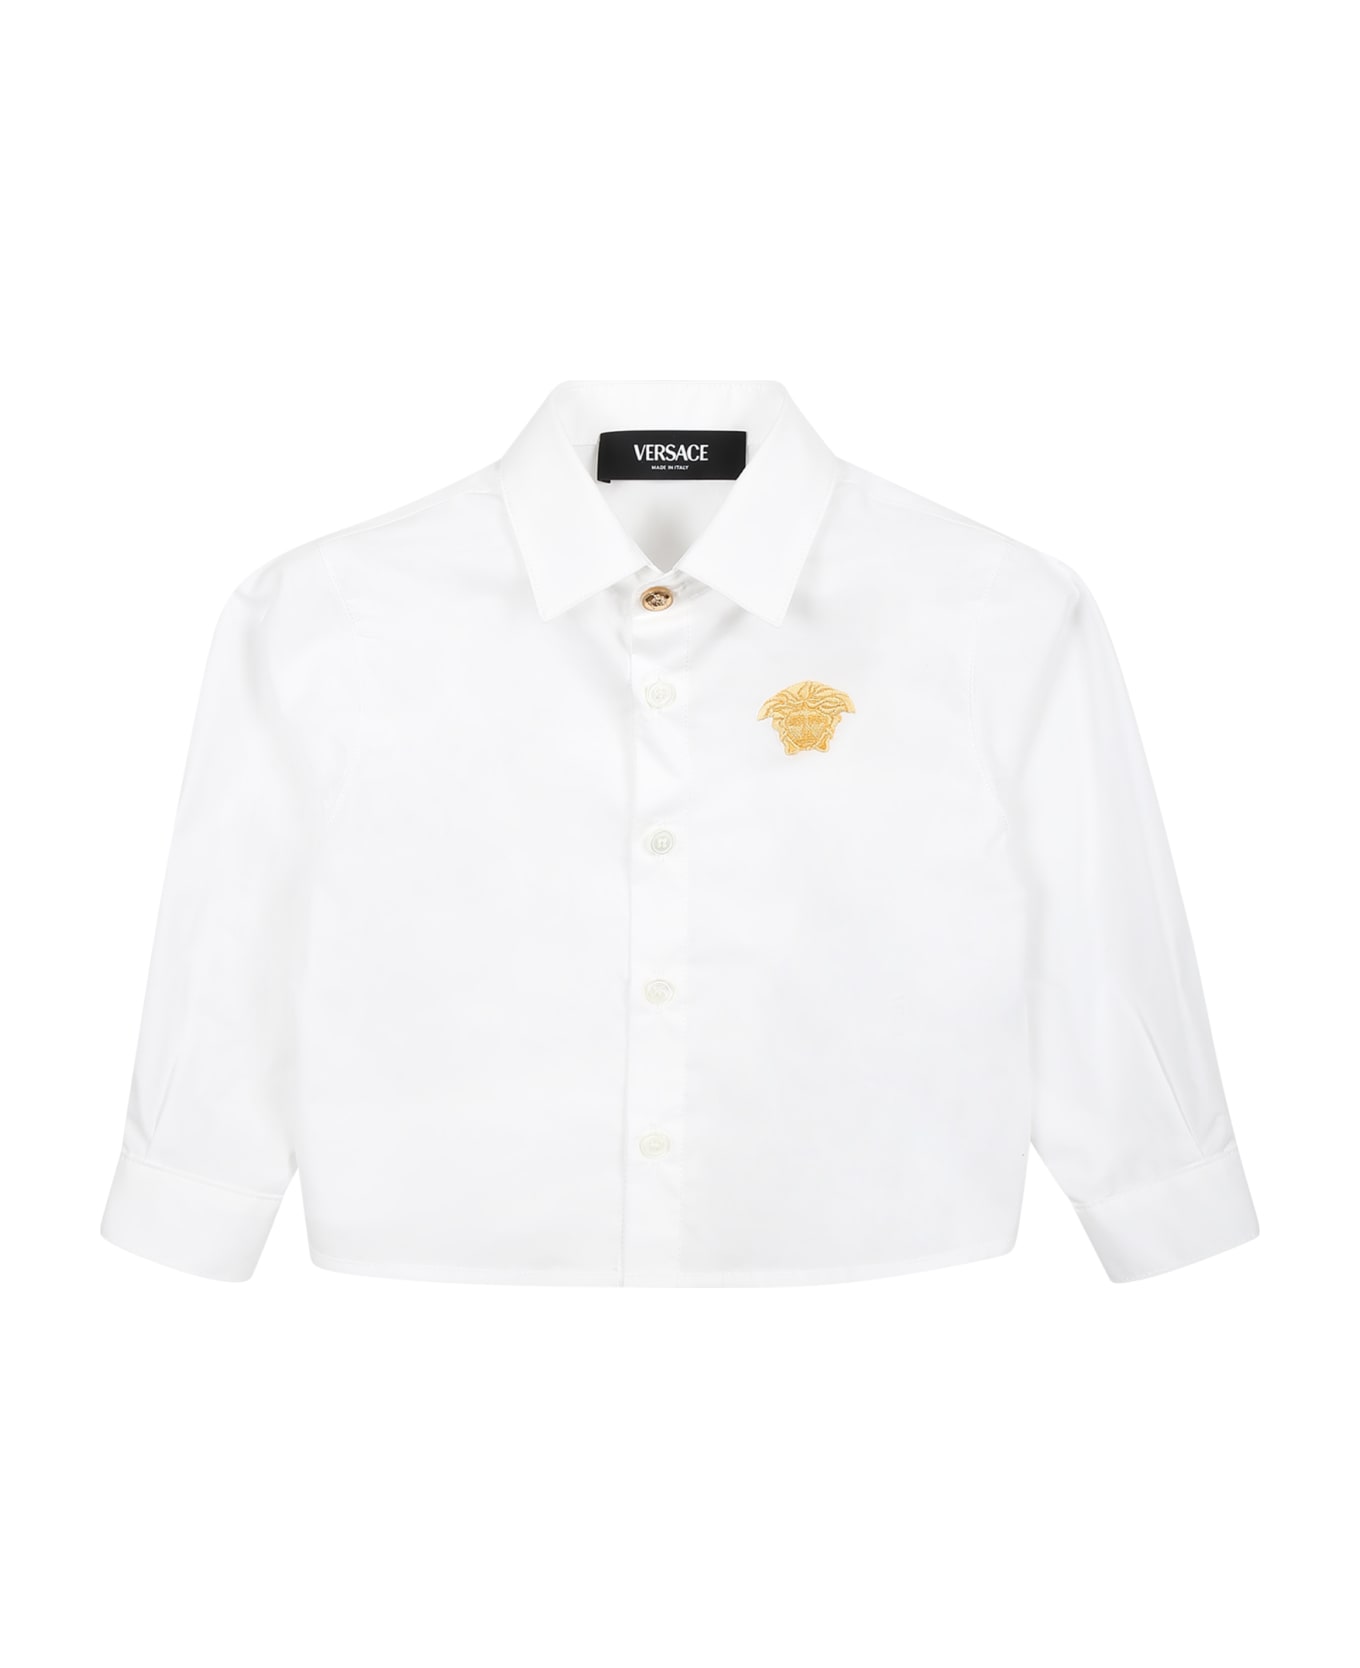 Versace White Shirt For Baby Boy With Iconic Medusa - White シャツ